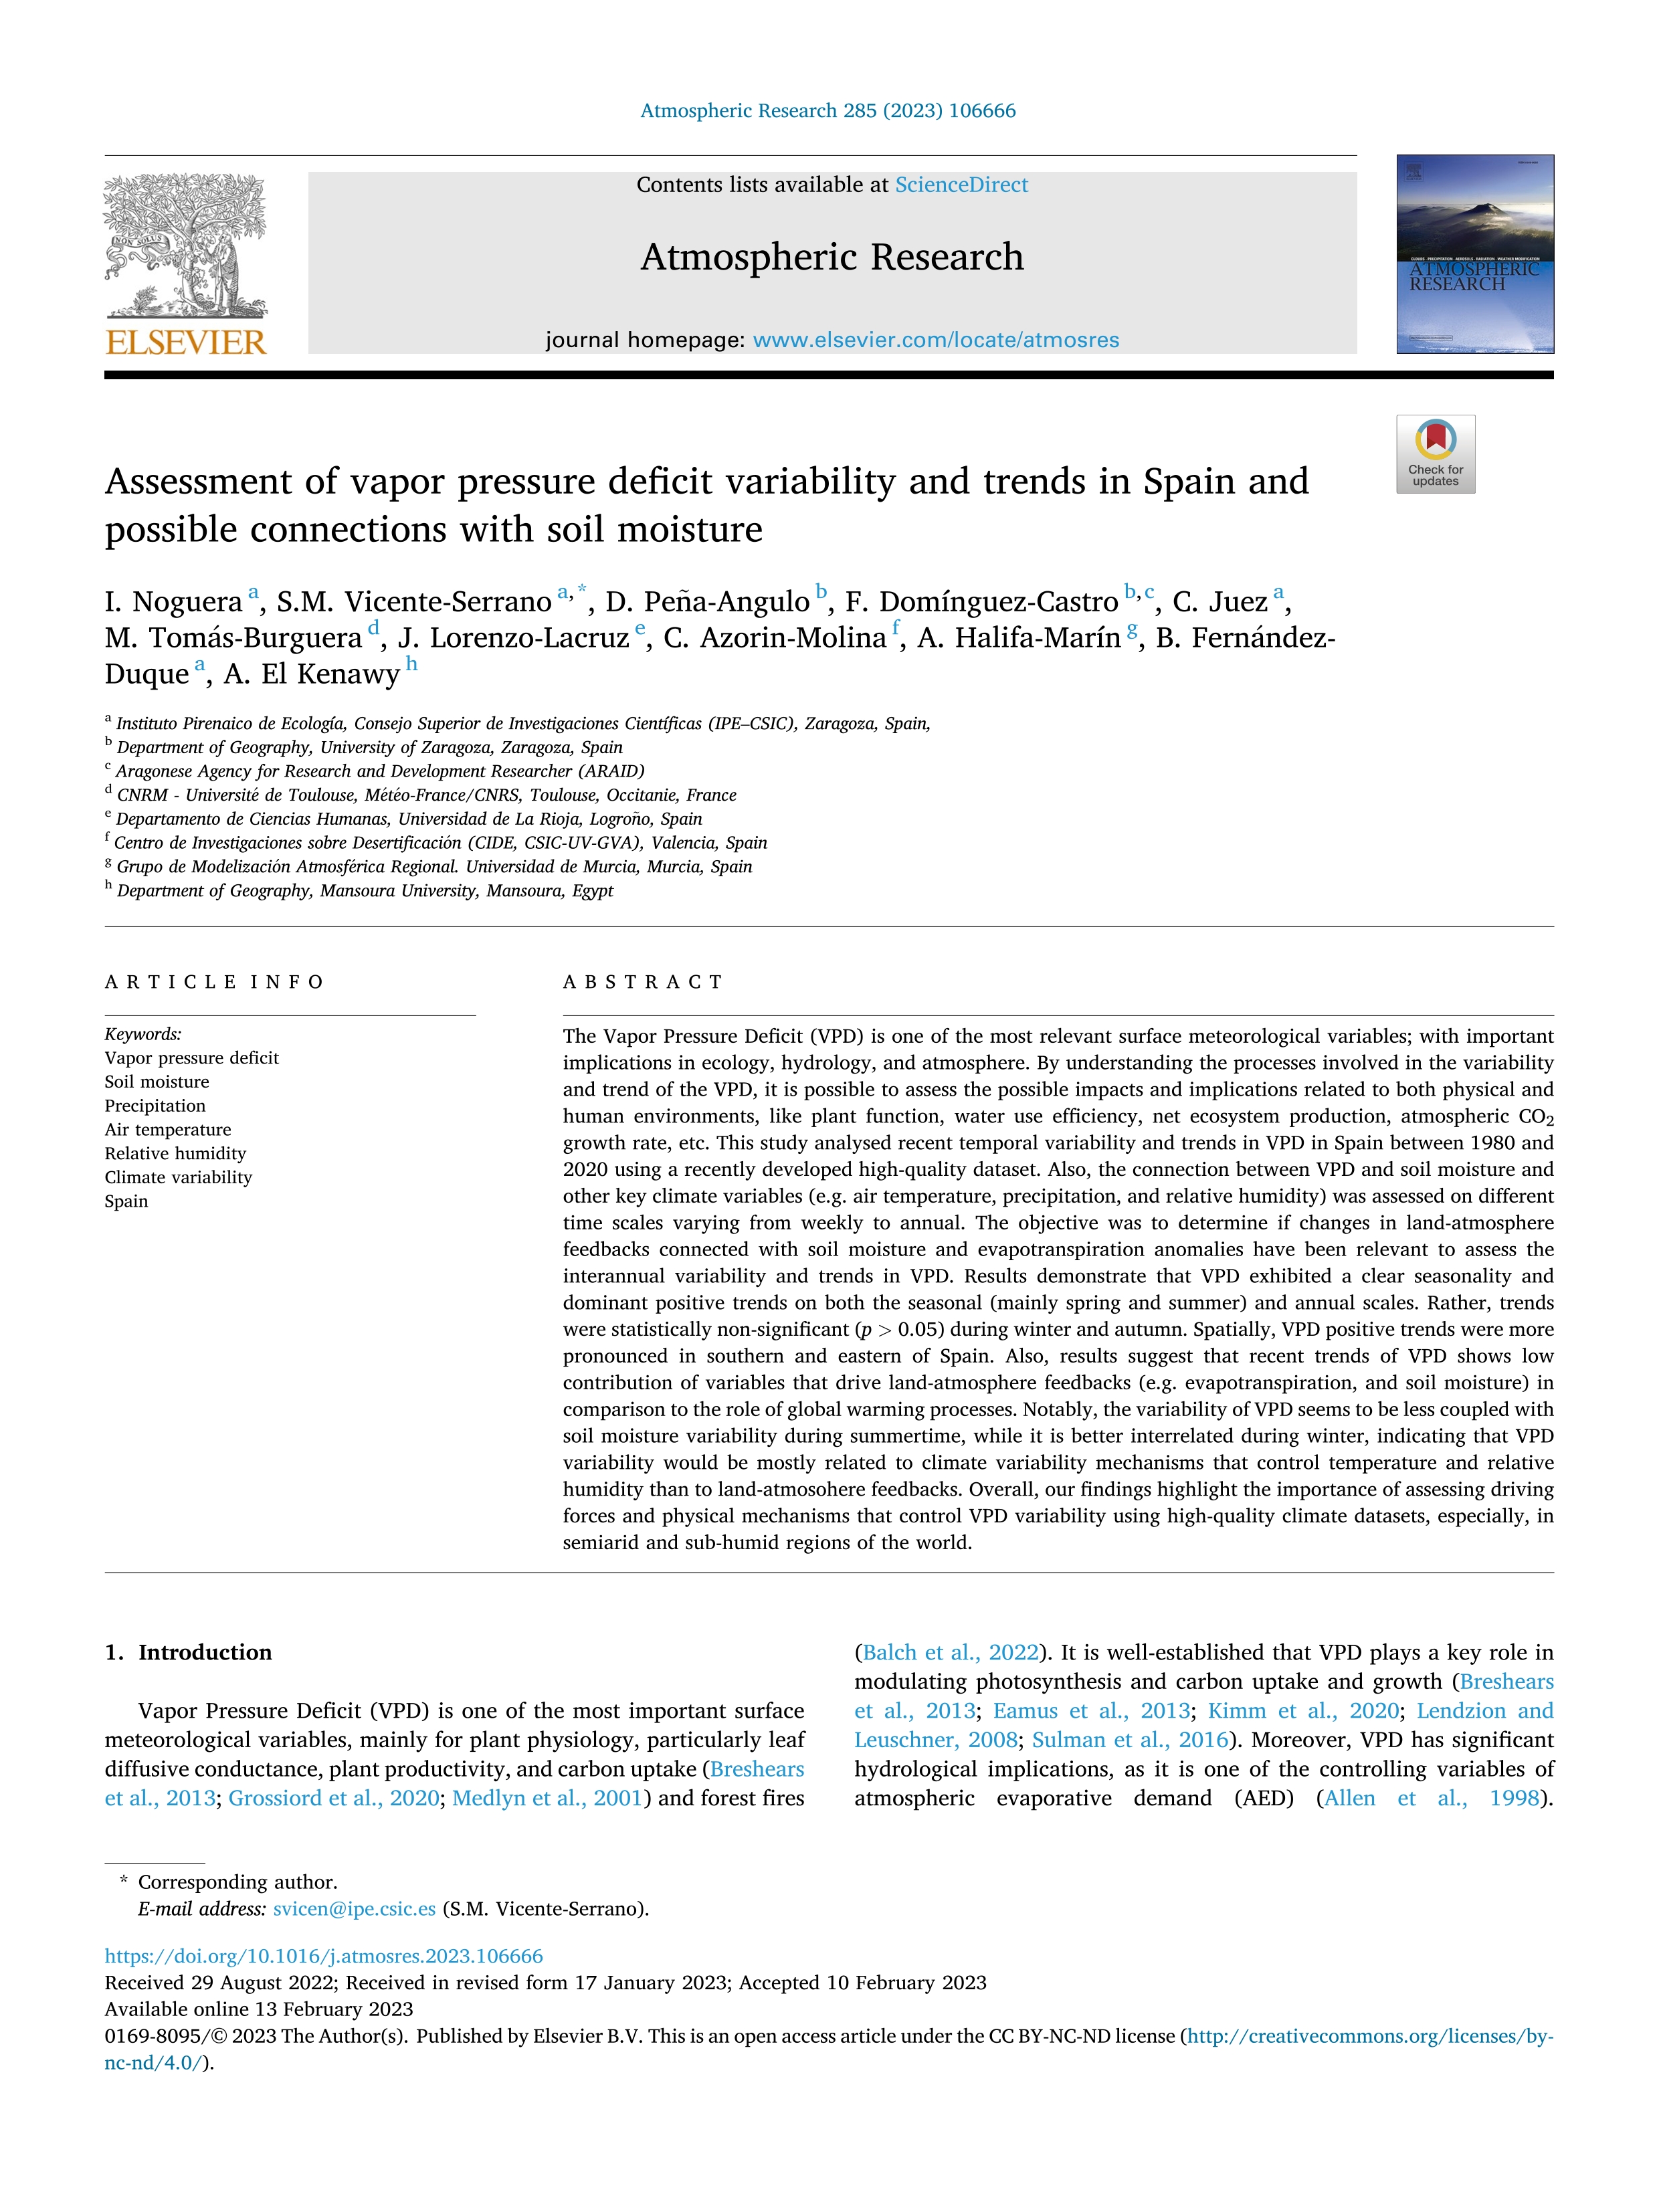 Assessment of vapor pressure deficit variability and trends in Spain and possible connections with soil moisture